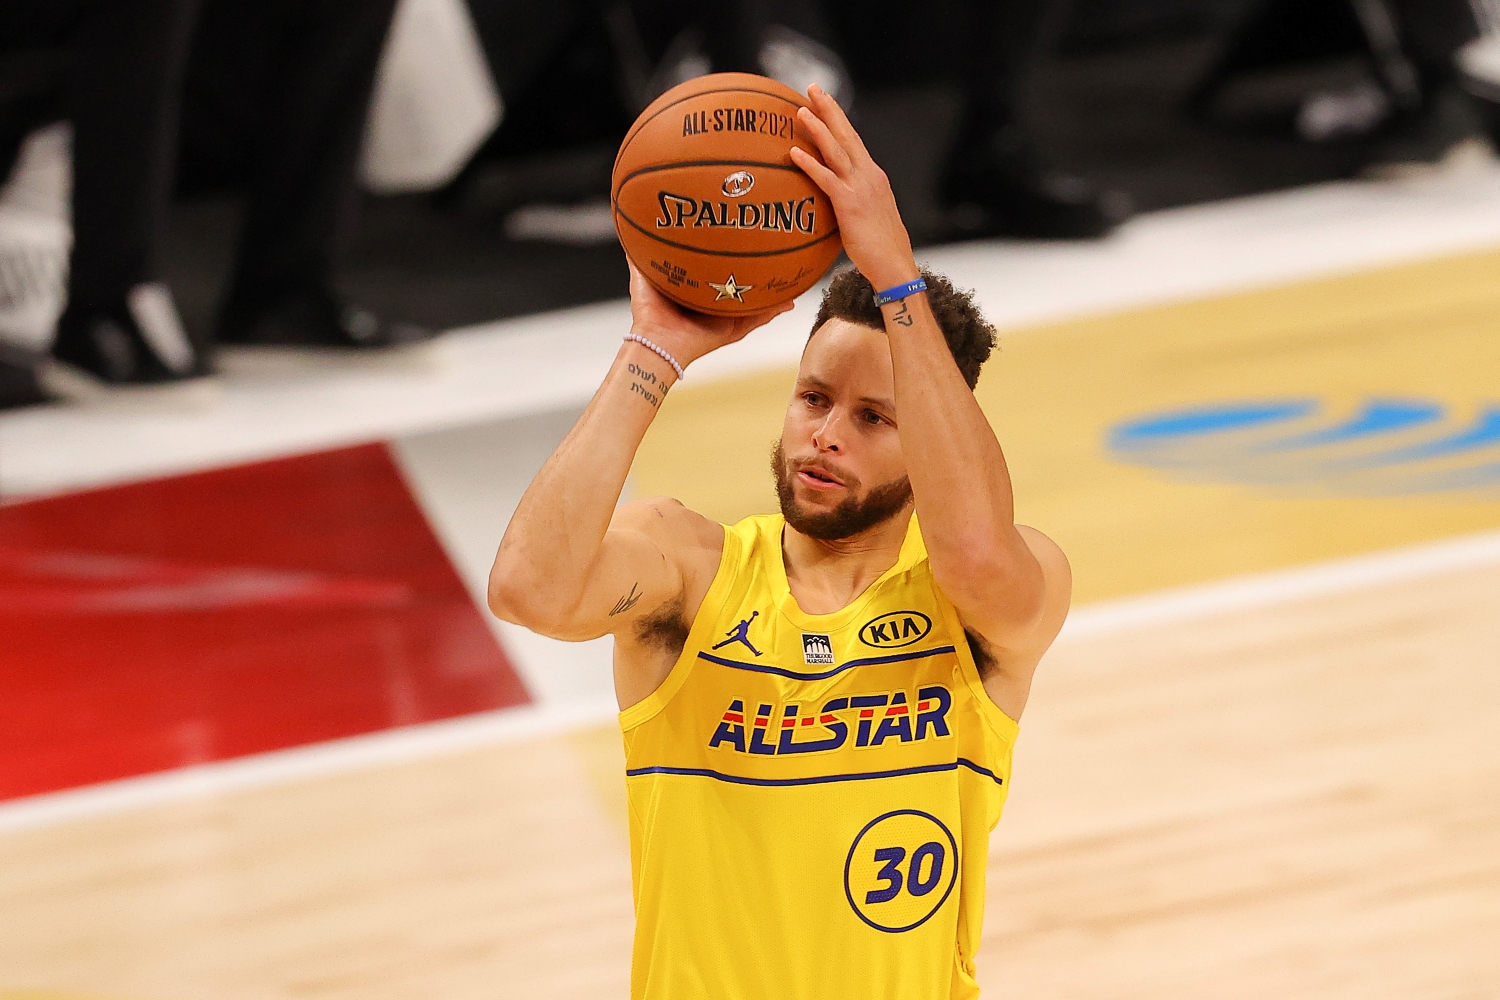 About All-Star Future Performance a His Stephen Chilling NBA Curry Game After Sent Dominant His Warning